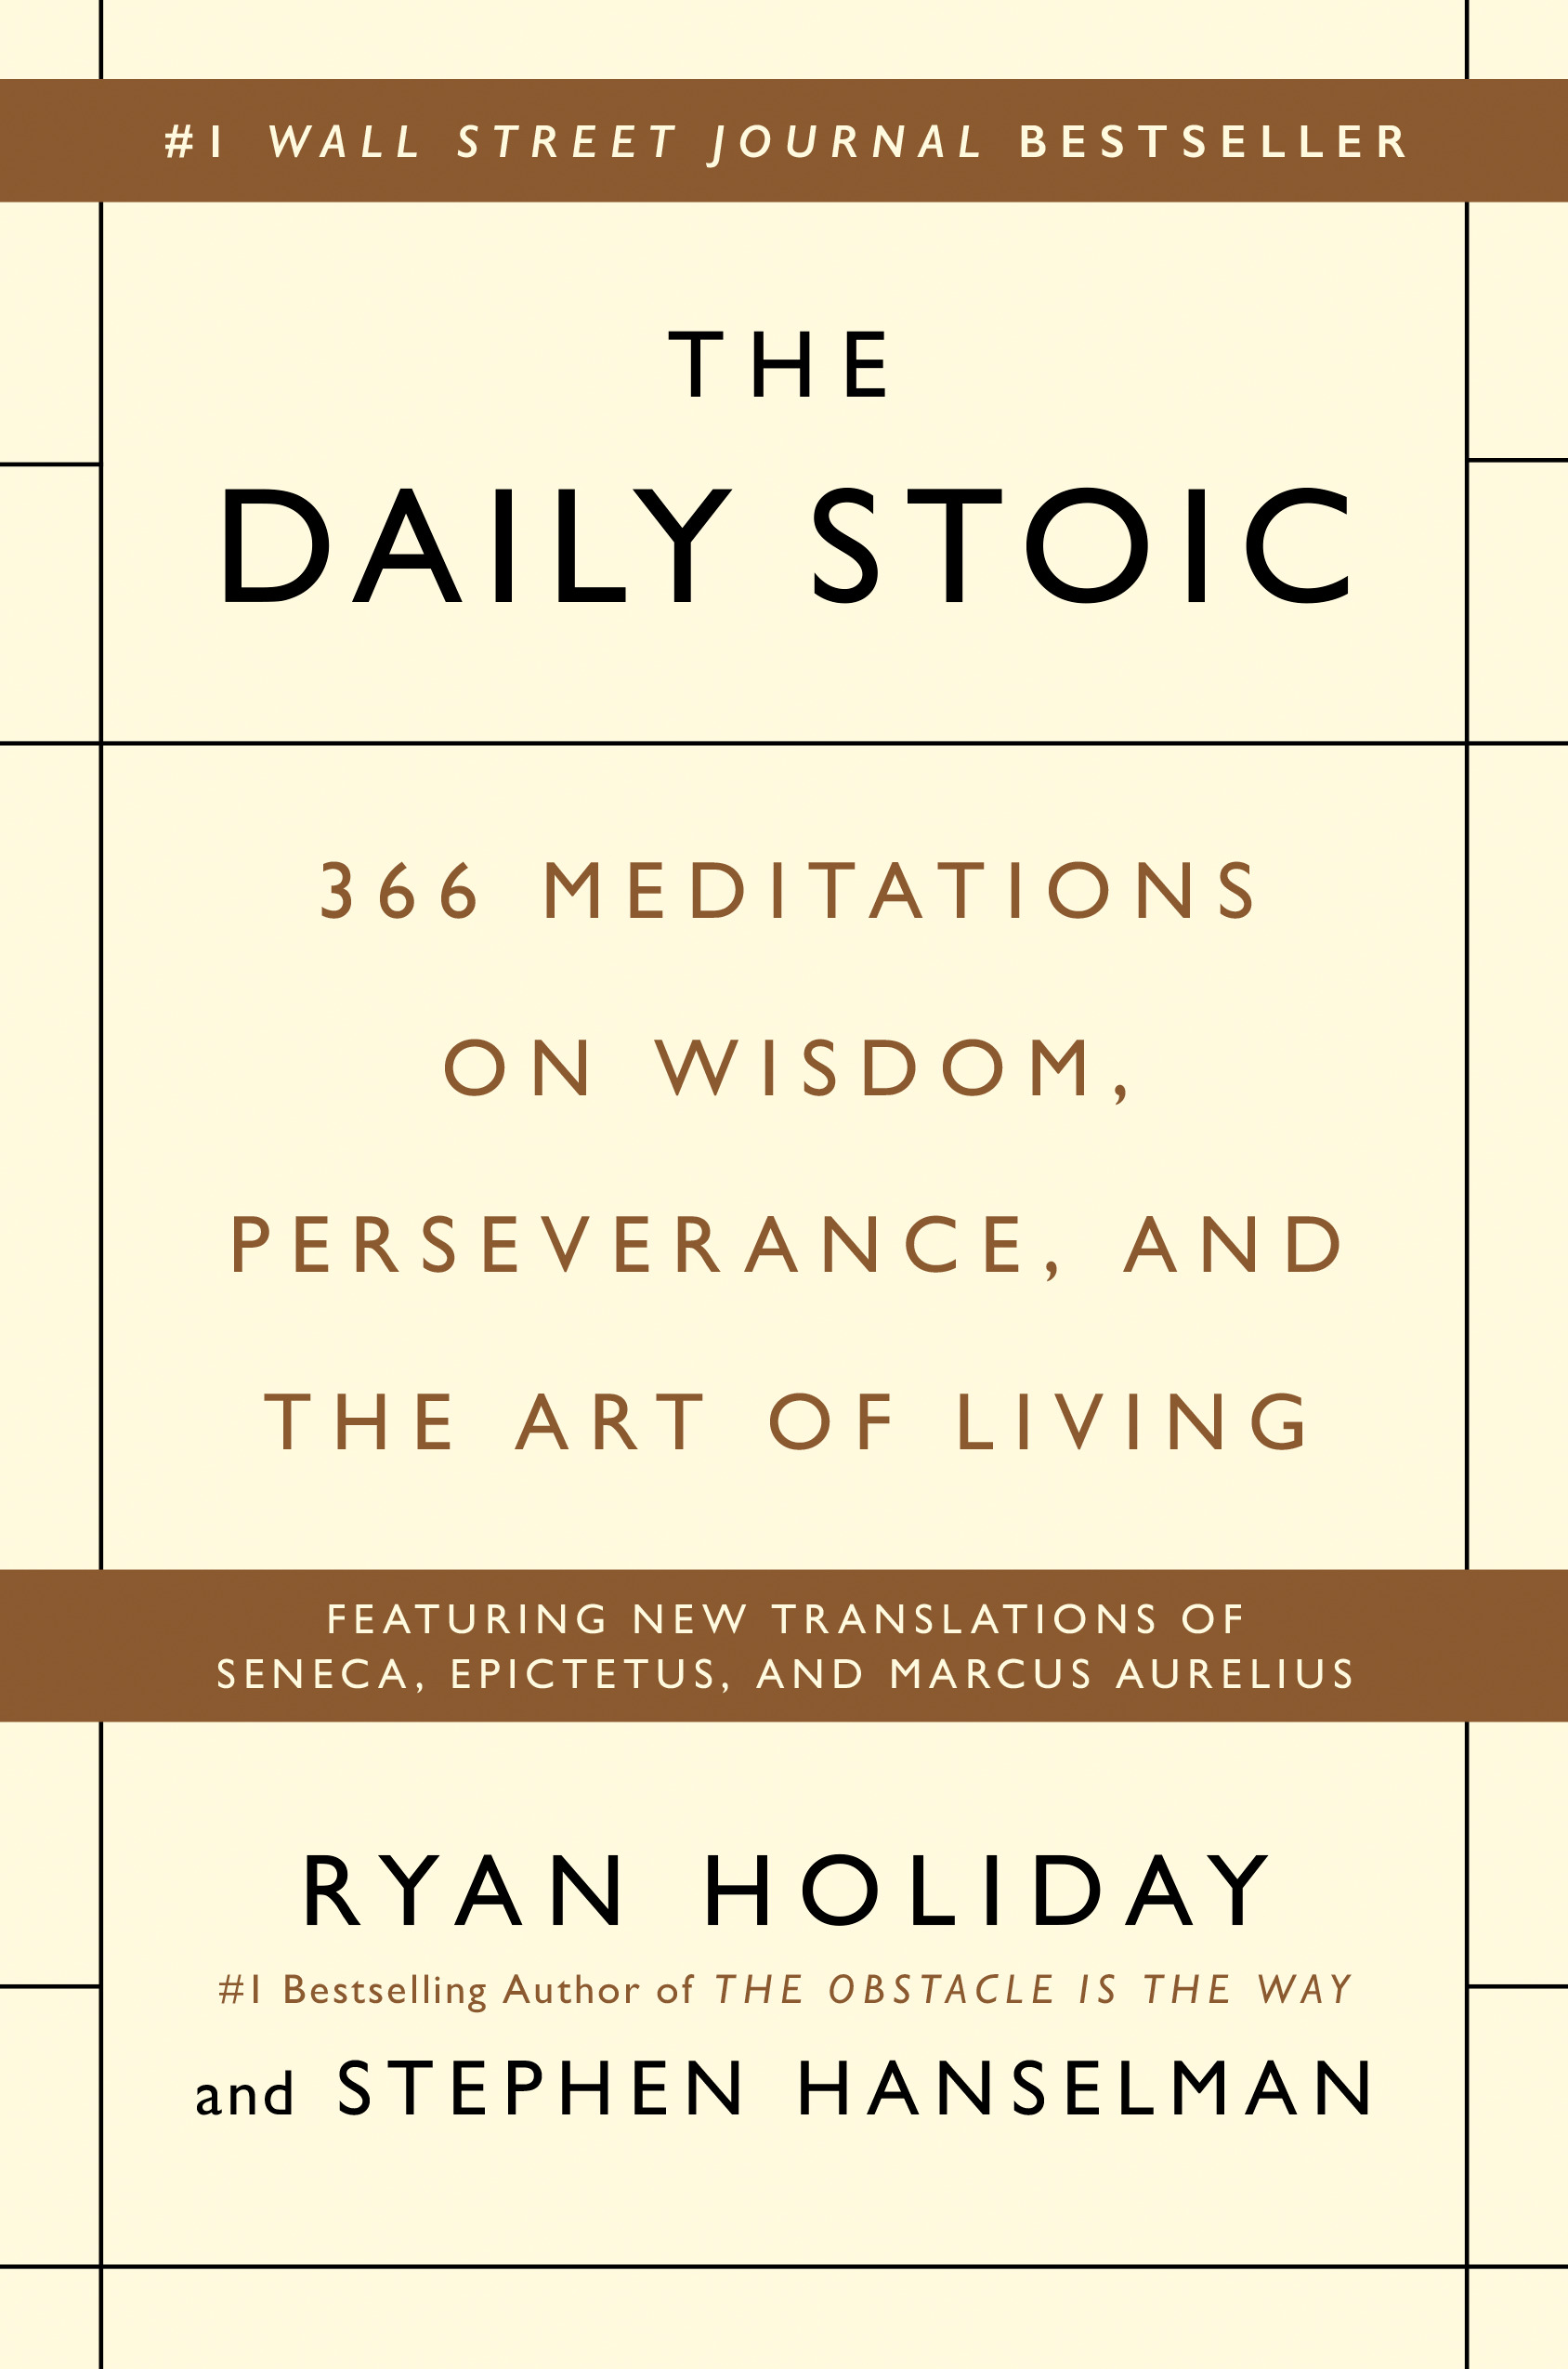 The Daily Stoic : 366 Meditations on Wisdom, Perseverance, and the Art of Living | Psychology & Self-Improvement